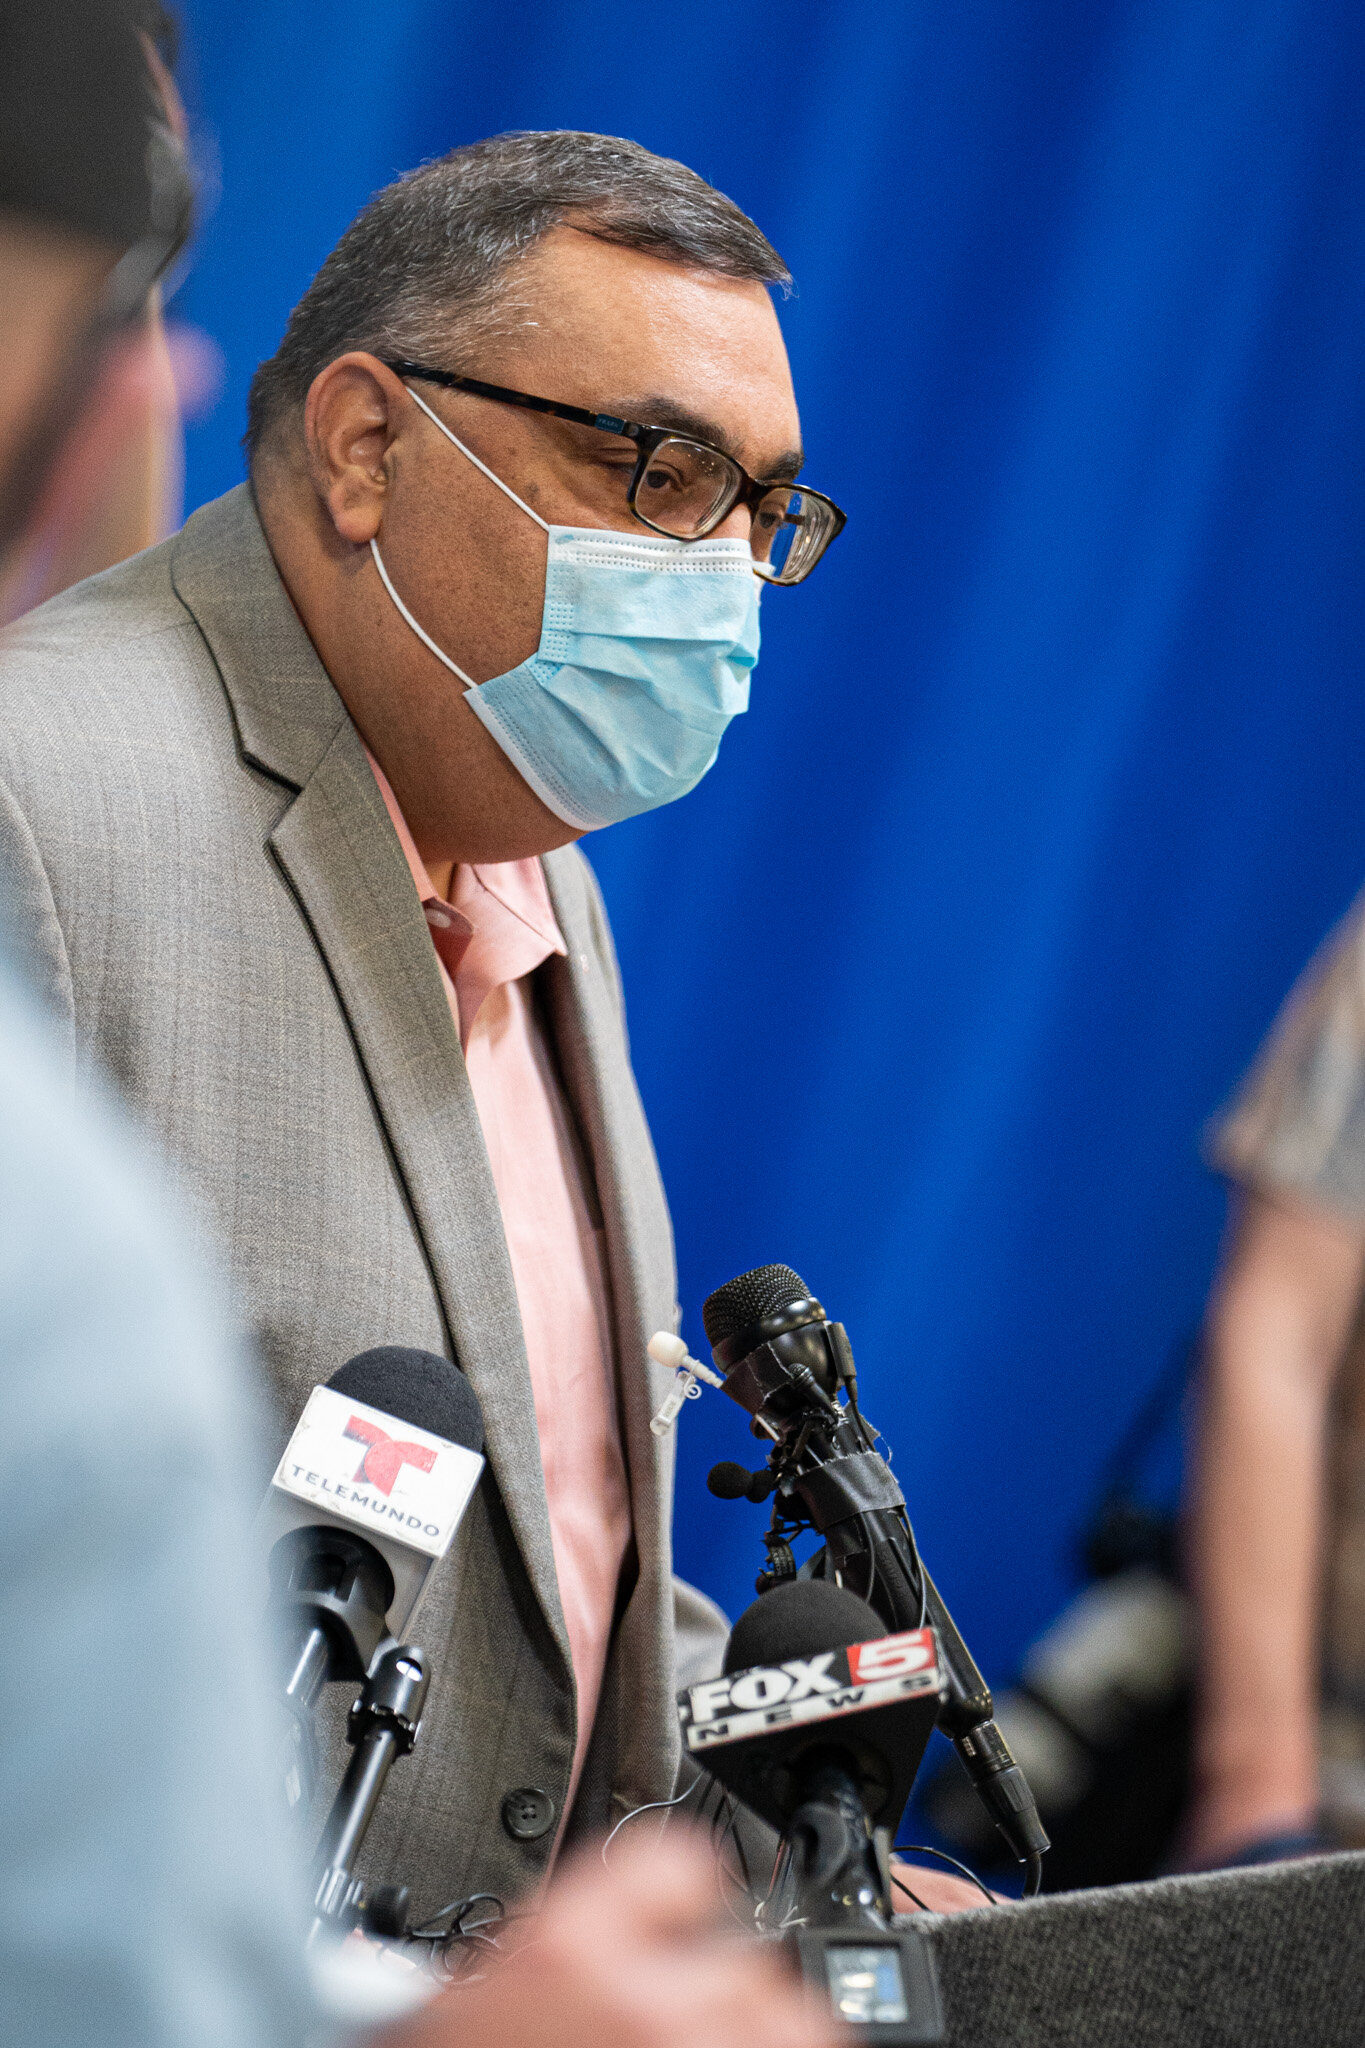  Joe Gloria, Registrar of Voters for Clark County, hosts a press conference to provide an update on the ballot counts being processed in the facility. November 5, 2020 